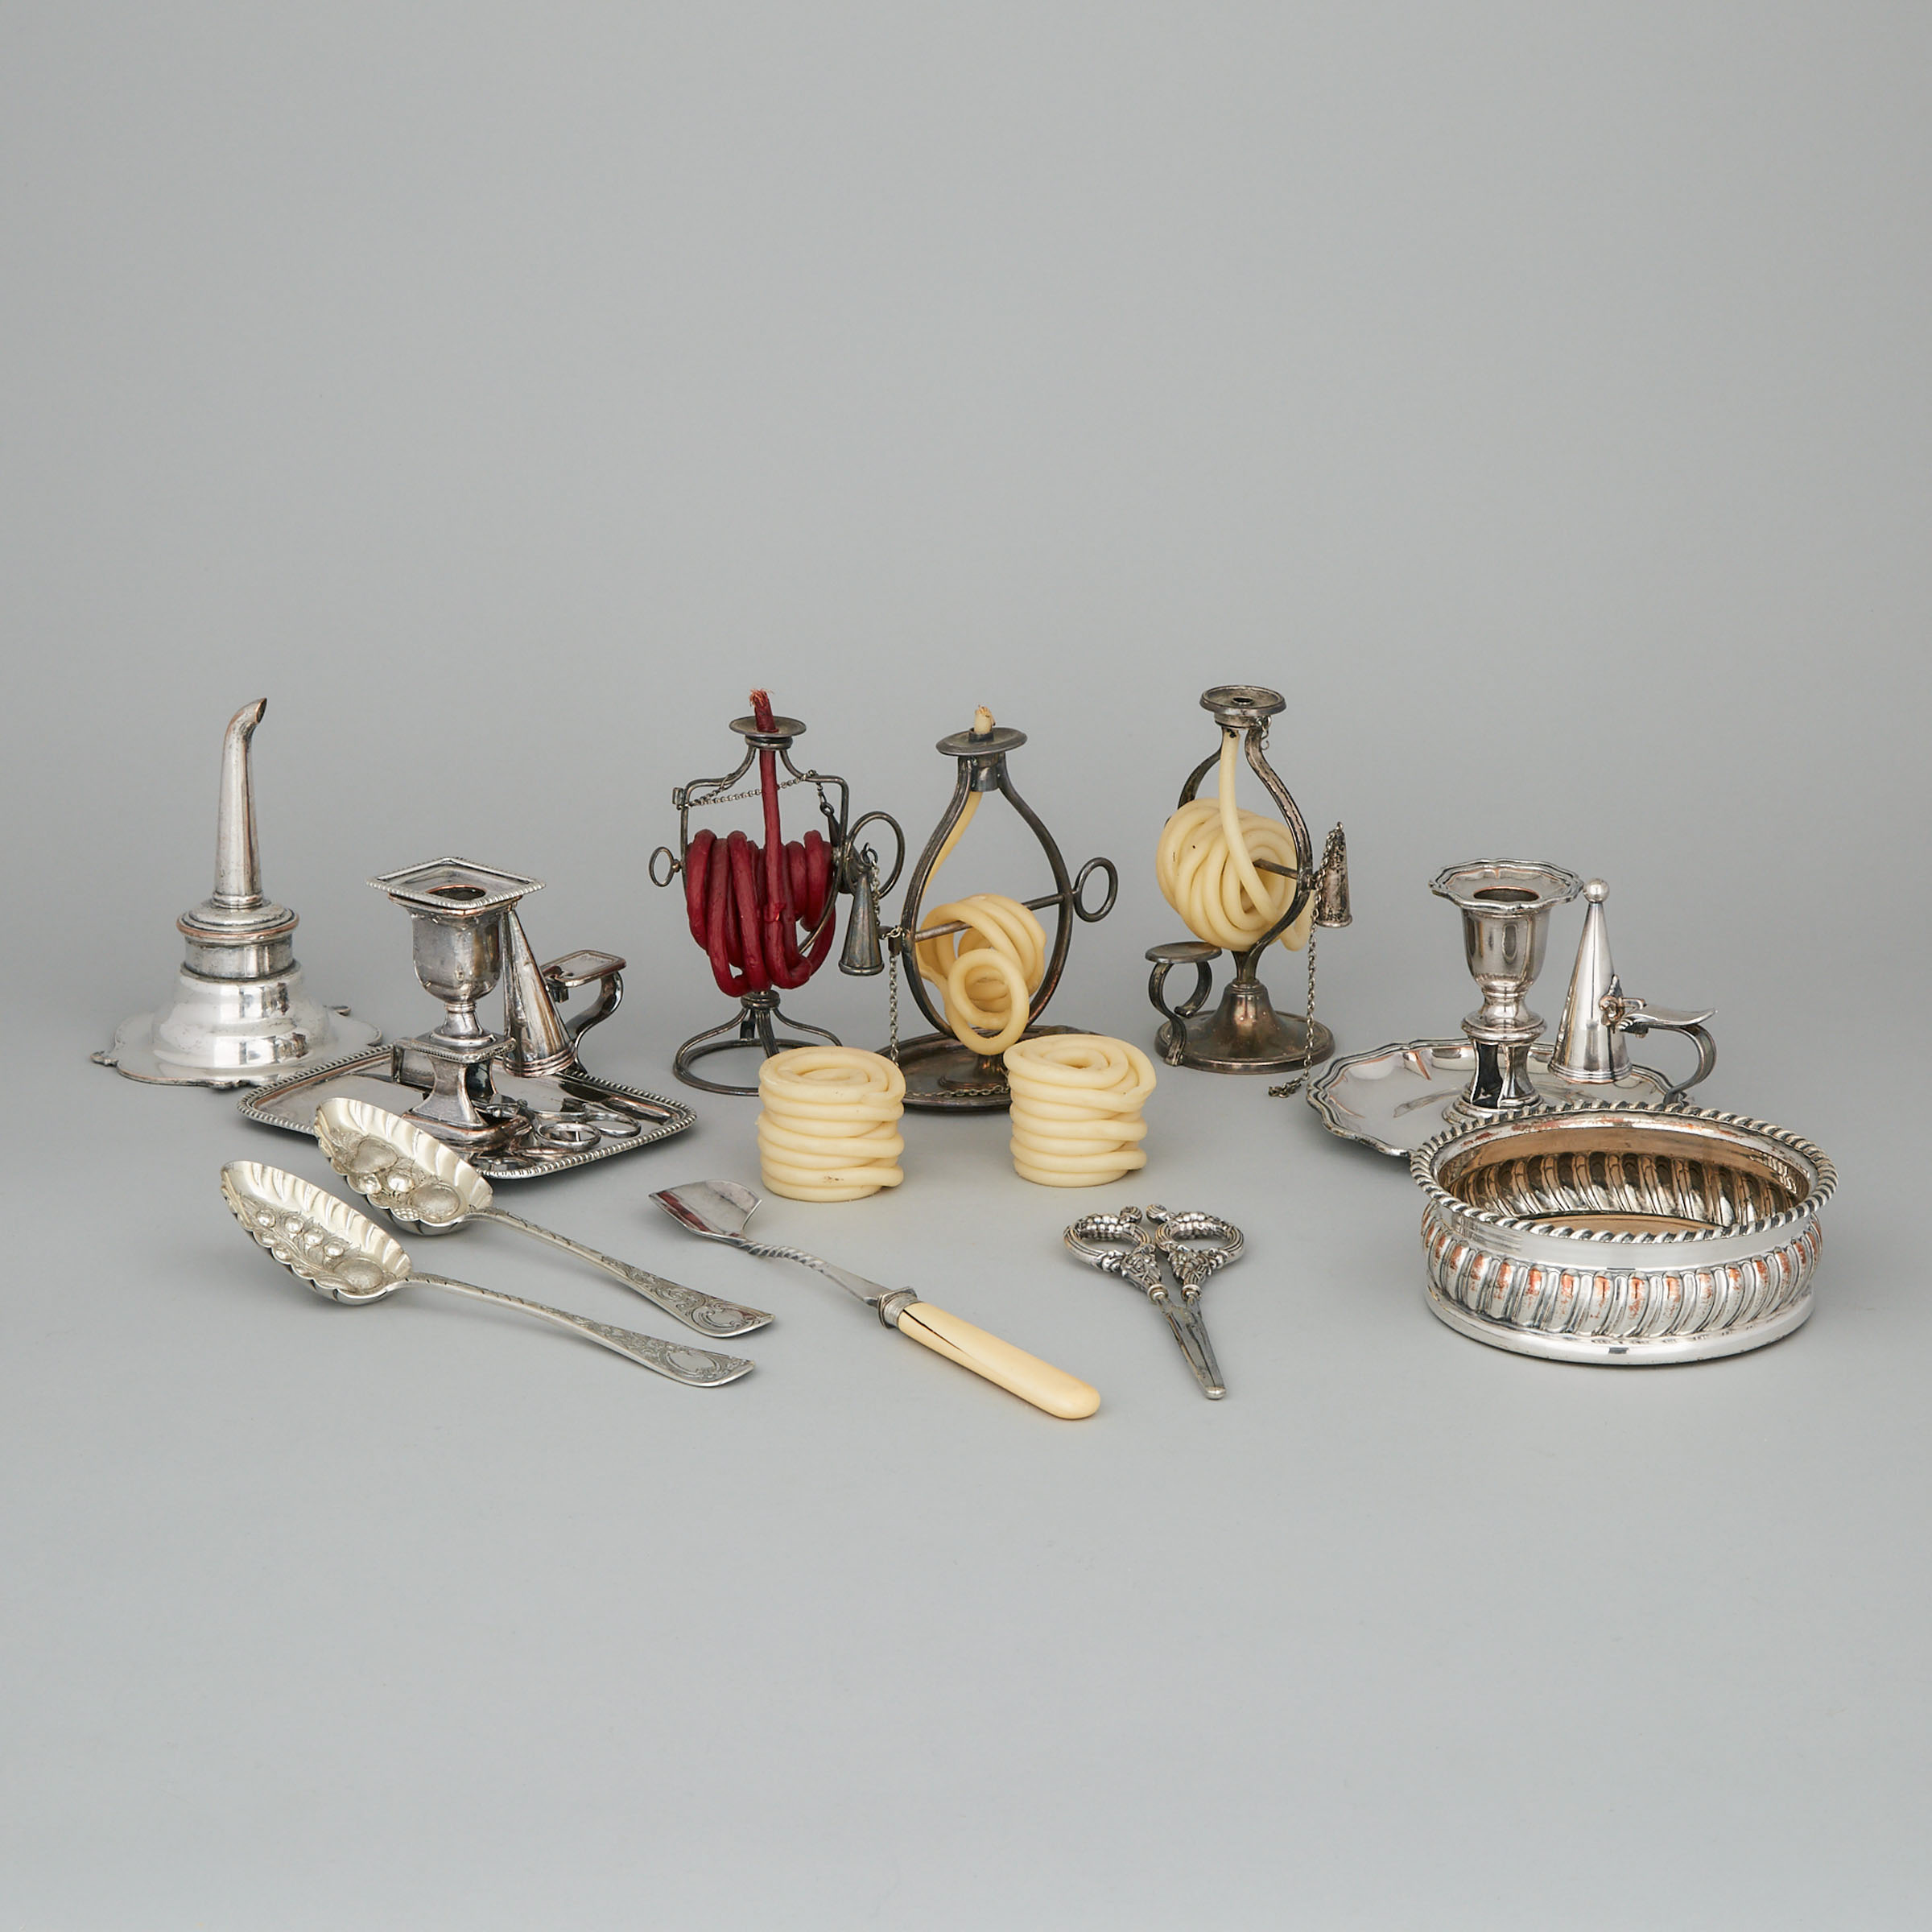 Group of English Silver Plate, mainly 19th century